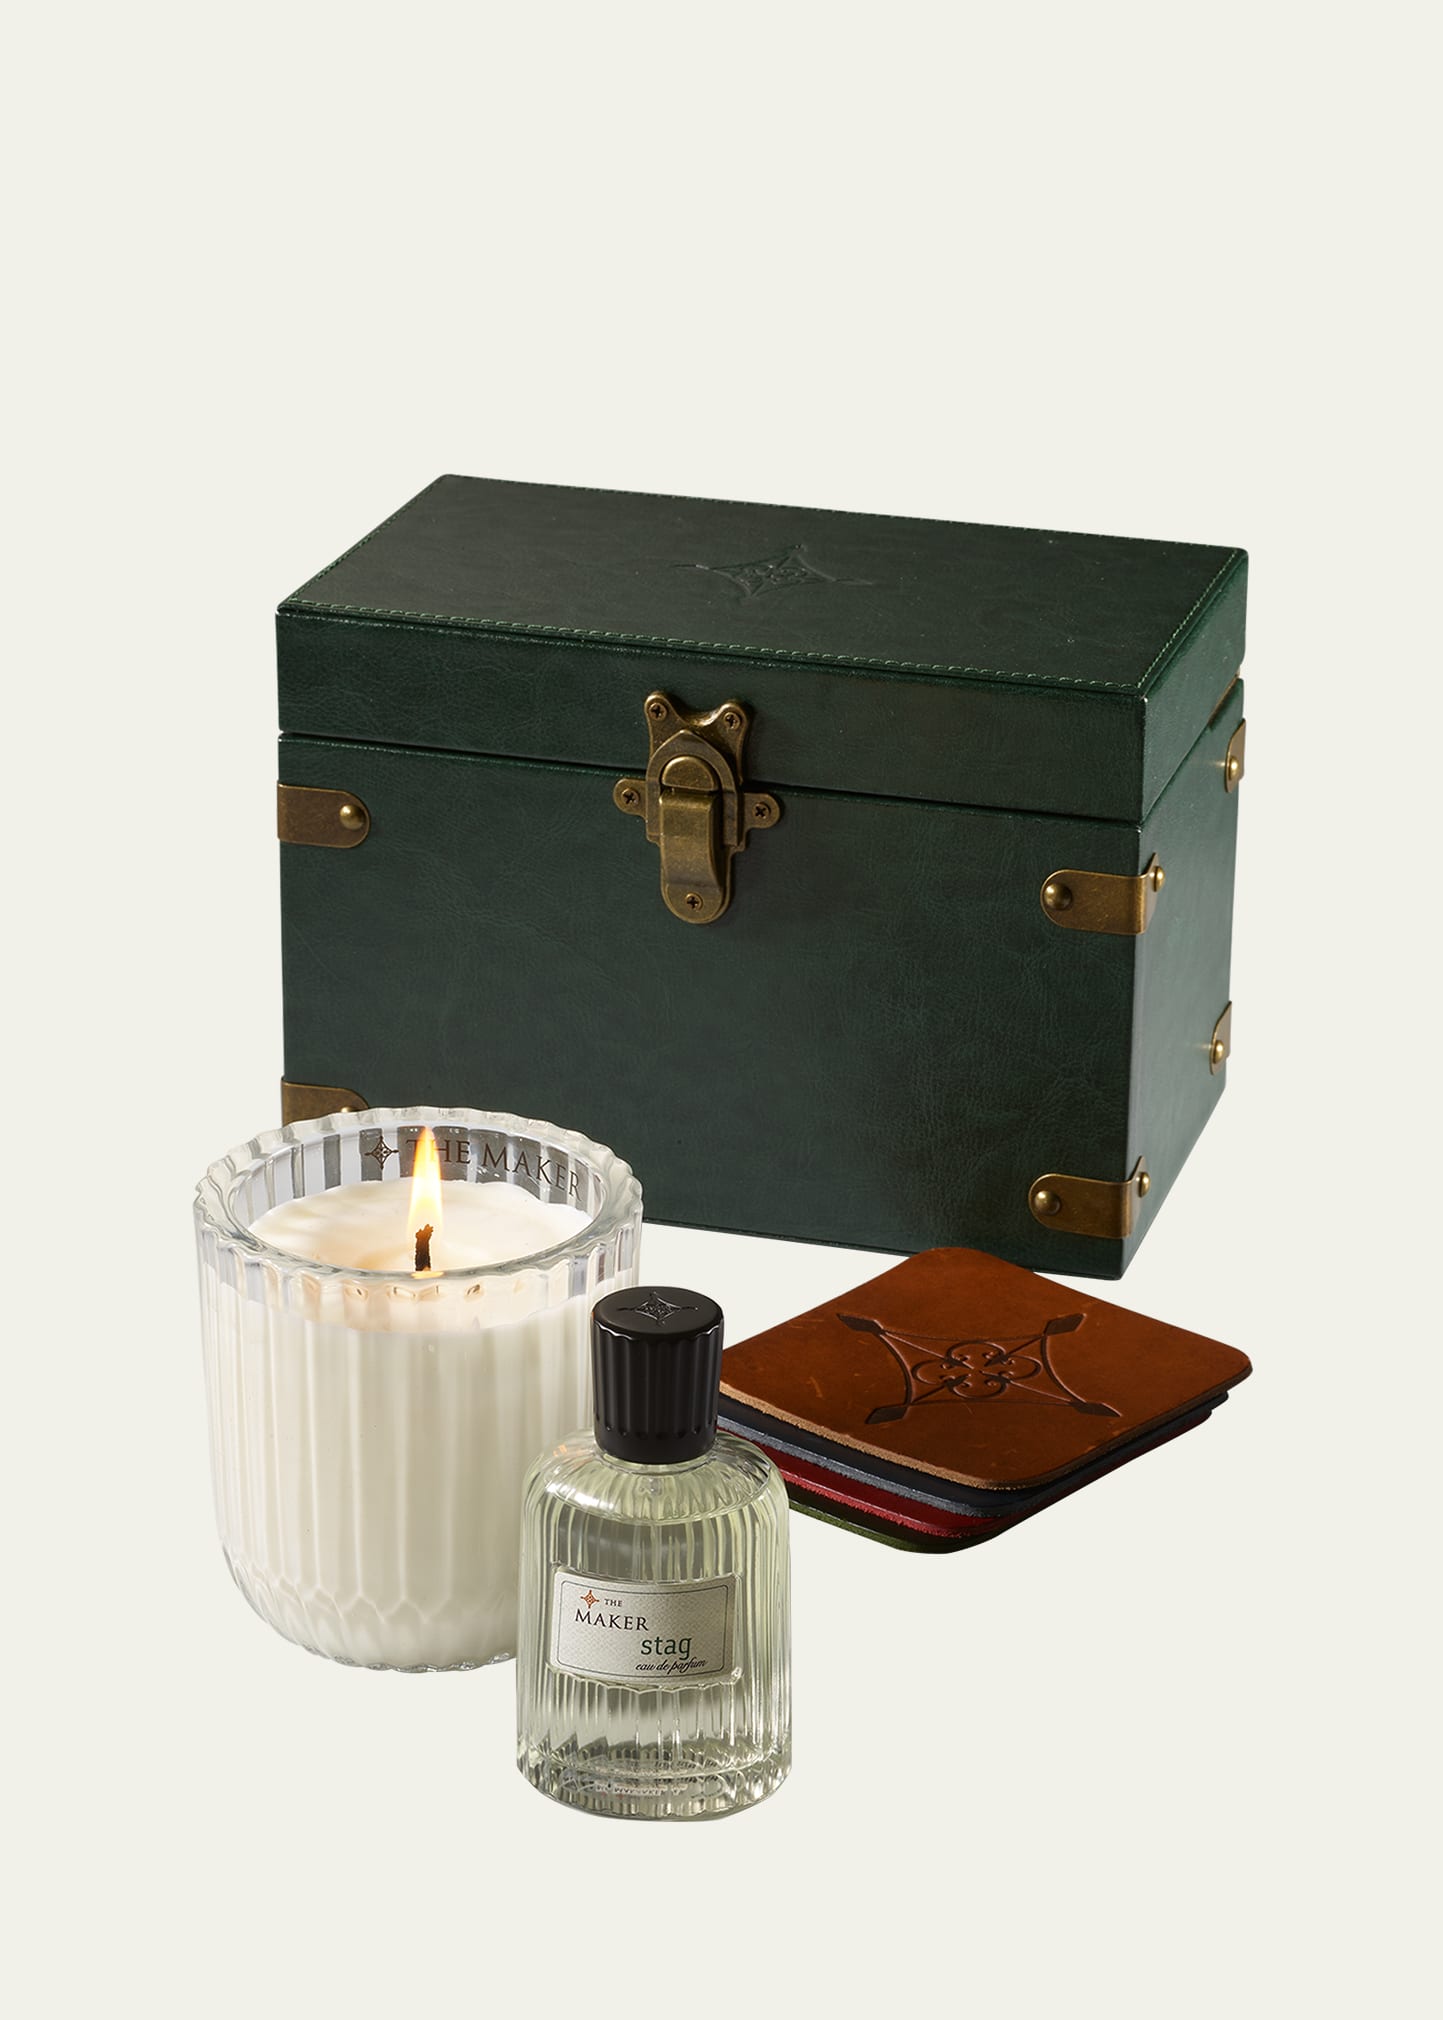 Shop The Maker Fragrance Trunk Duo